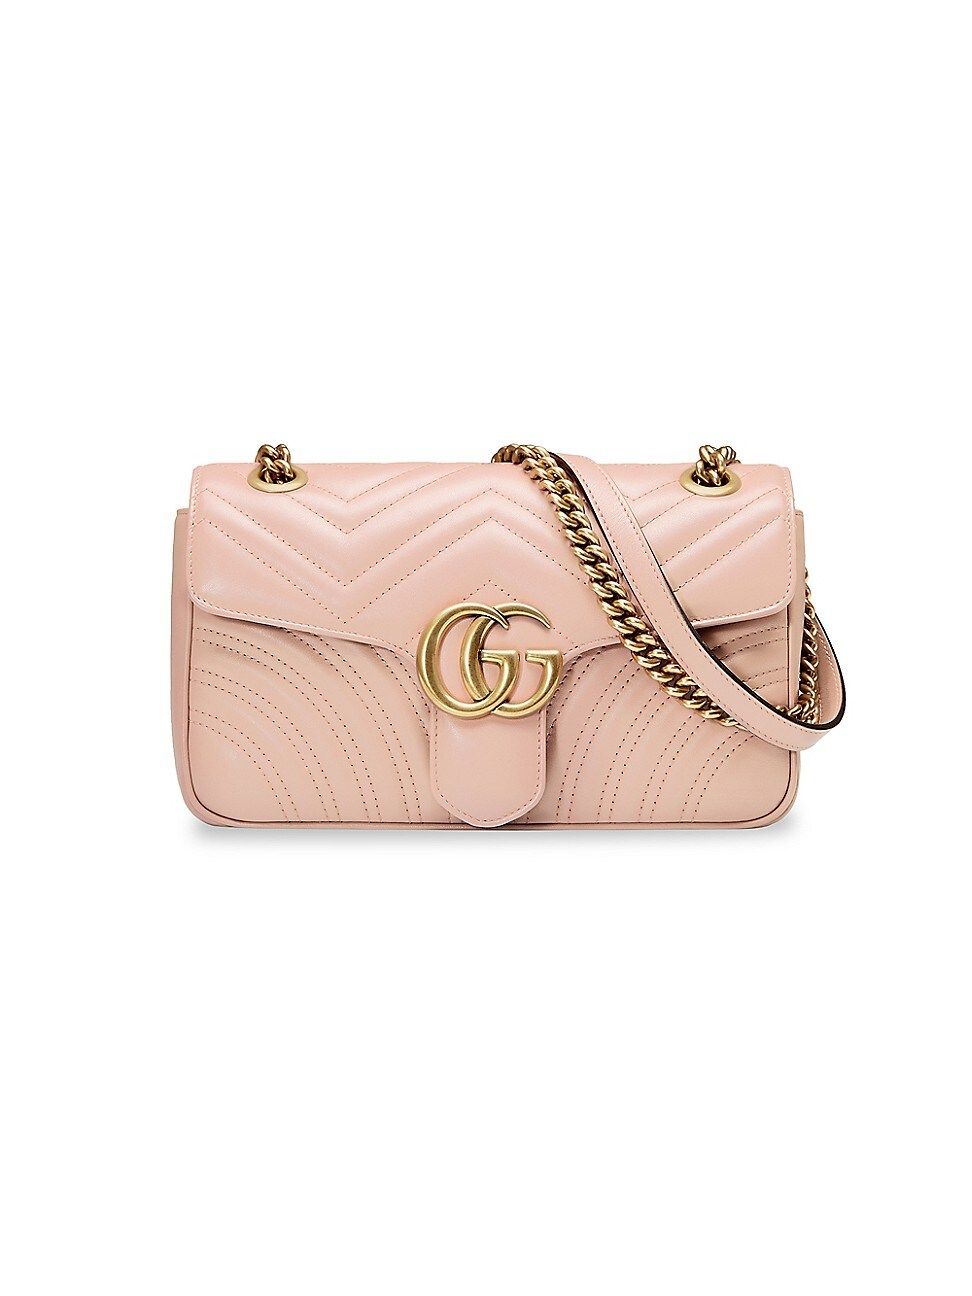 Gucci Women's GG Marmont Small Shoulder Bag - Pink | Saks Fifth Avenue